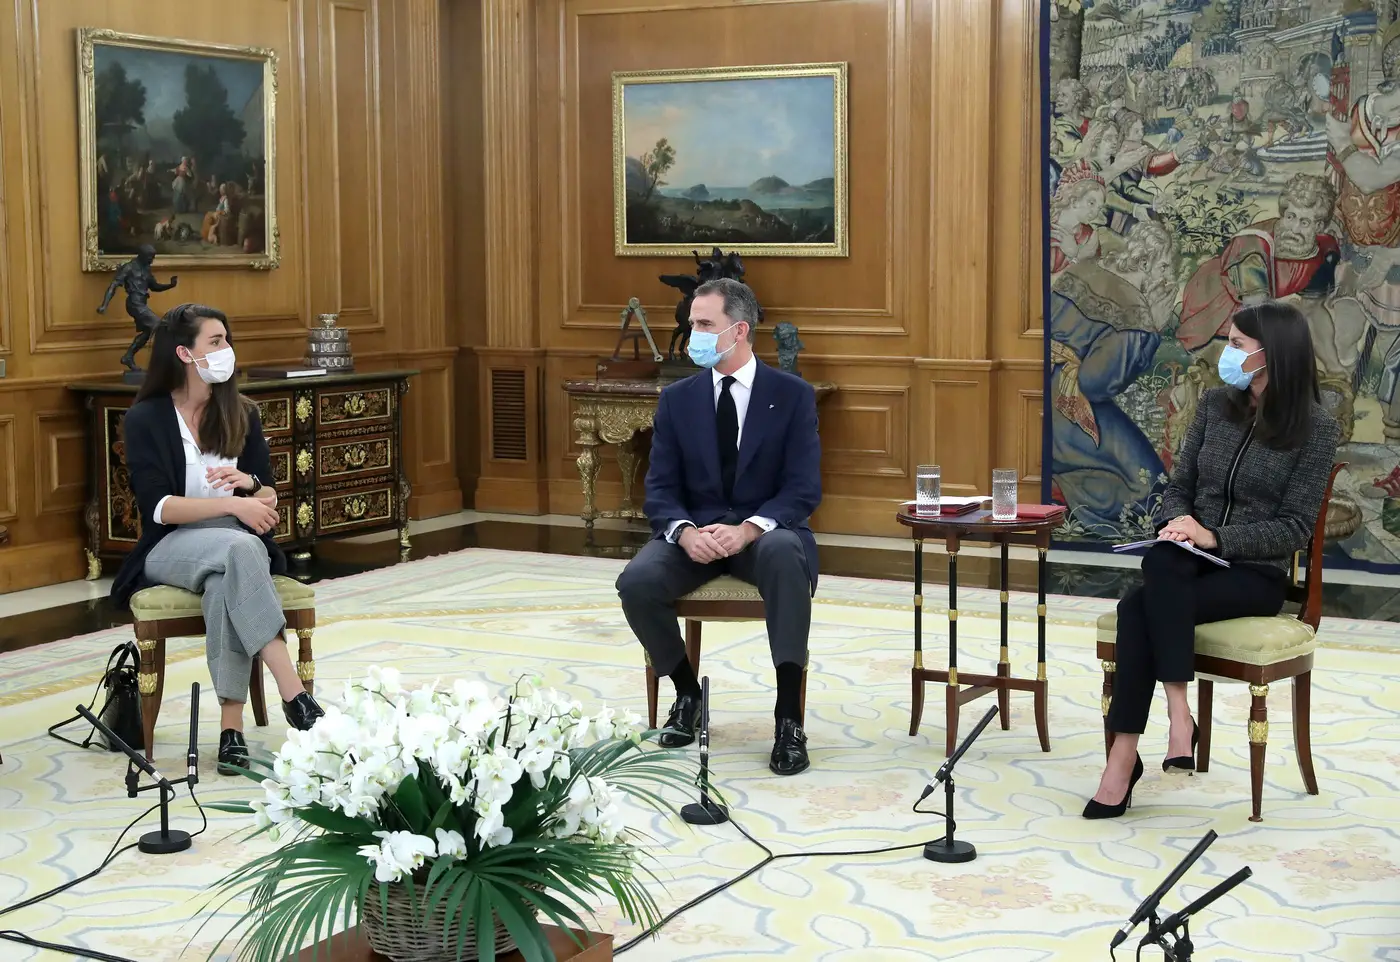 King Felipe and Queen Letizia during the discussion about the Coronavirus